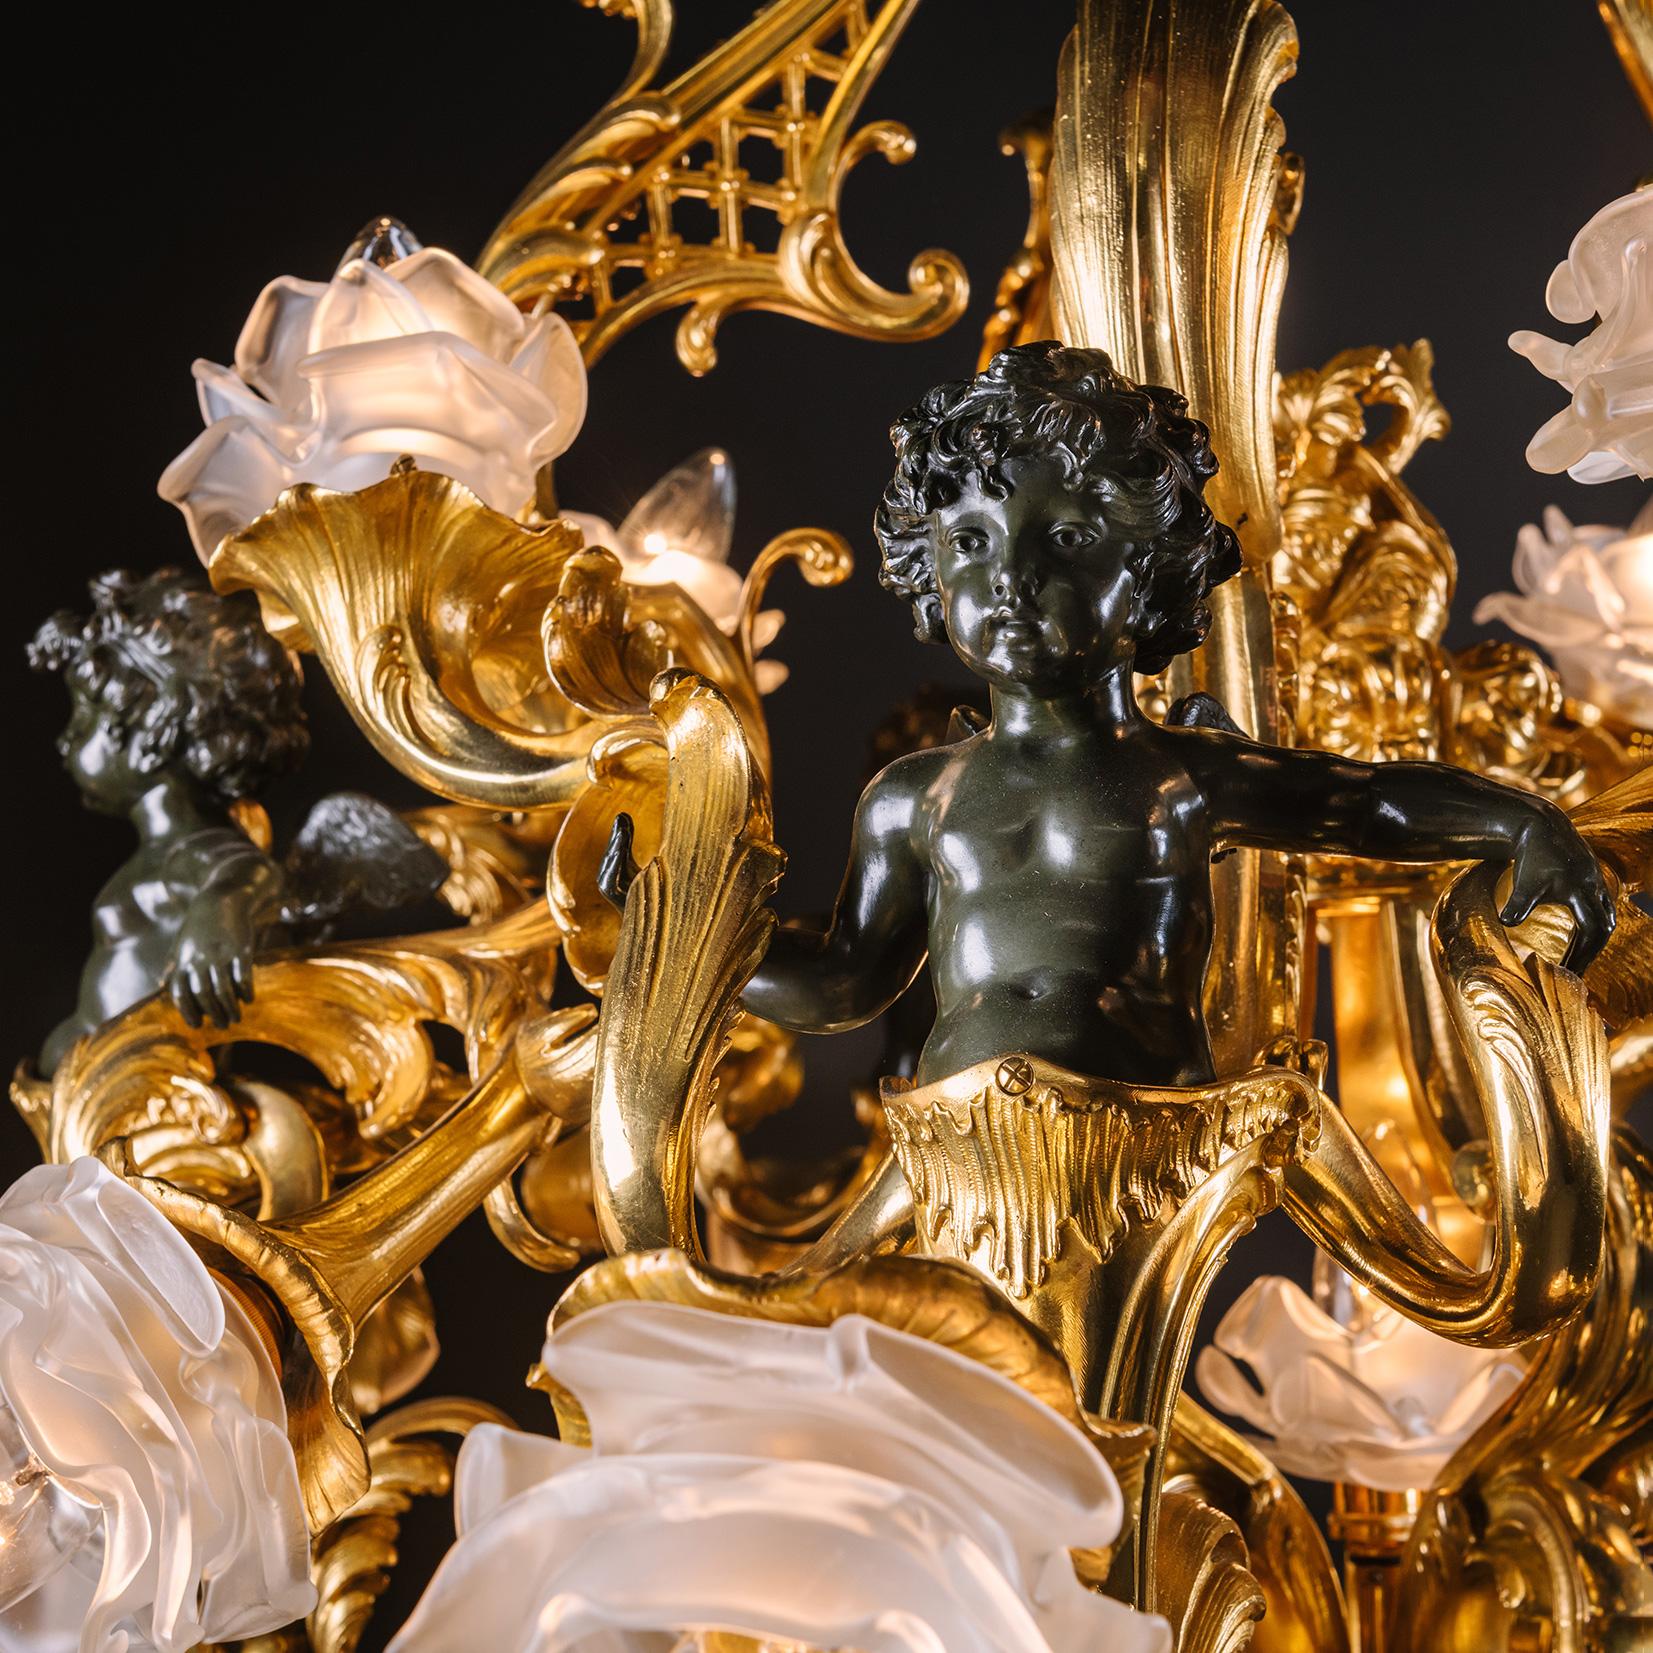 An impressive Belle Epoque gilt and patinated bronze twenty-one light chandelier. Attributed to Maison Millet, Paris. 

This spectacular chandelier is modelled with a sinuous gilt-bronze scrollwork frame. The corona is cast with acanthus leaves